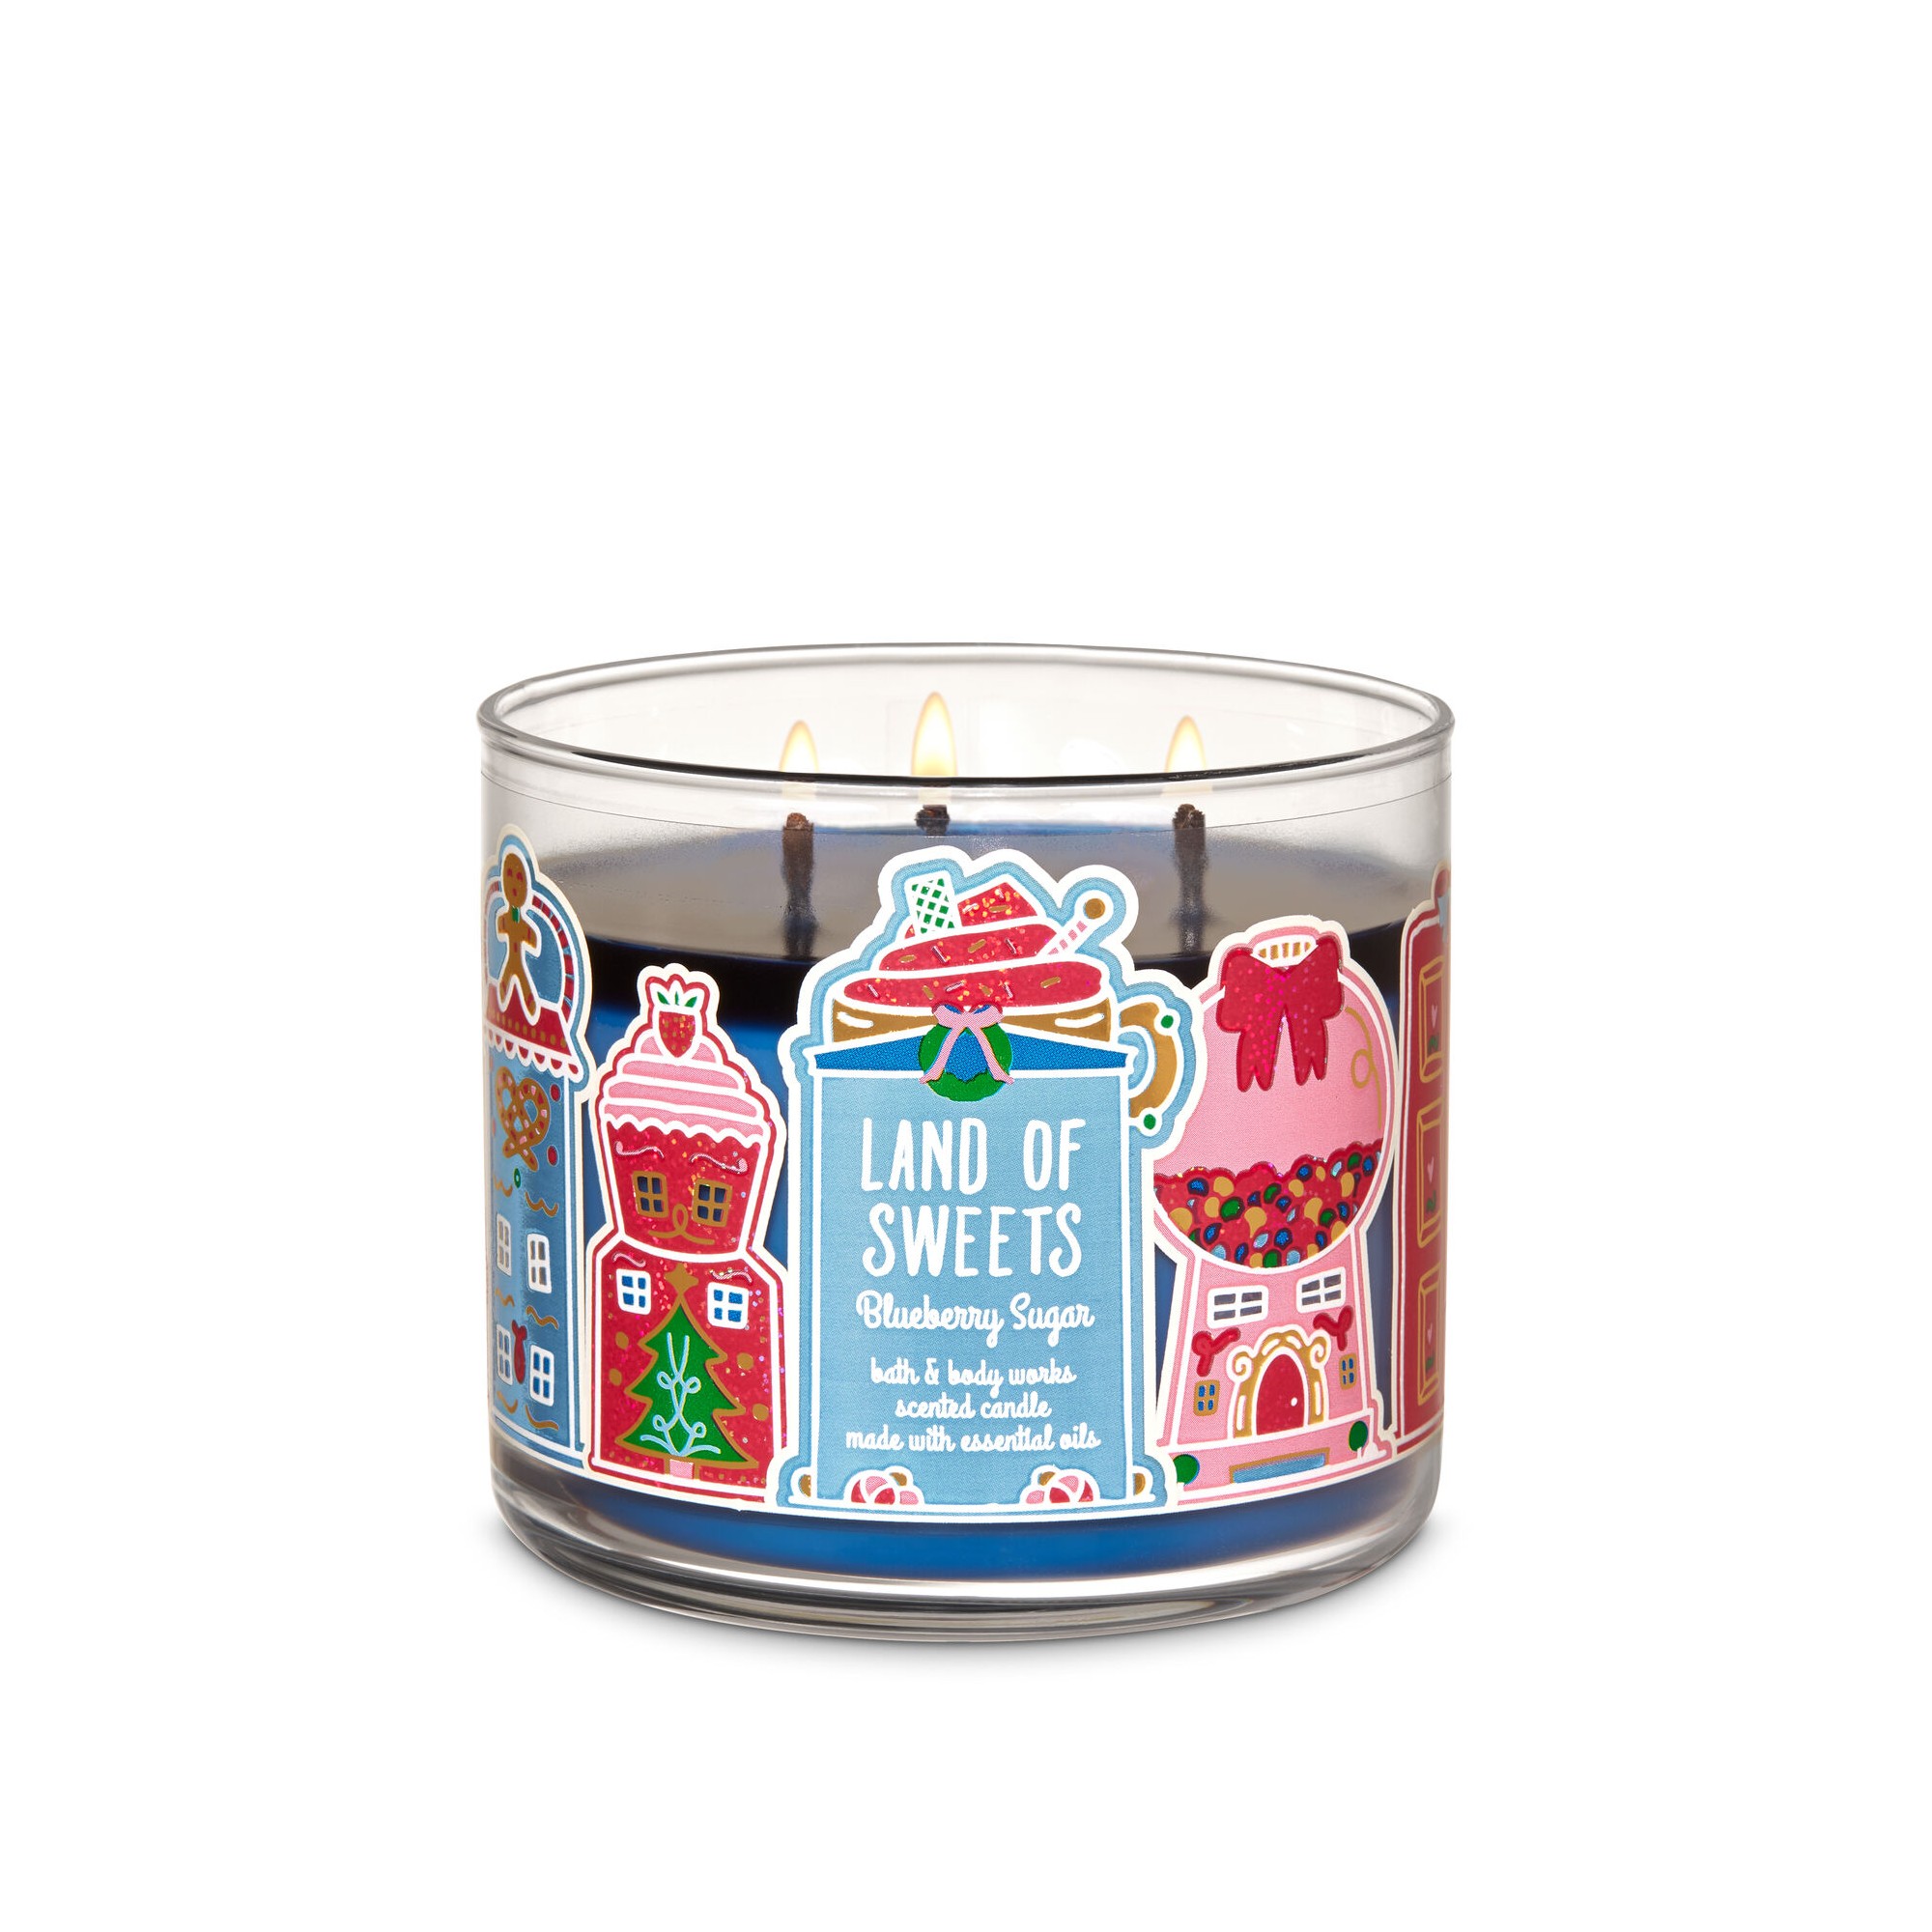 Bath & Body Works Land Of Sweets Blueberry Sugar 3 Wick Scented Candle